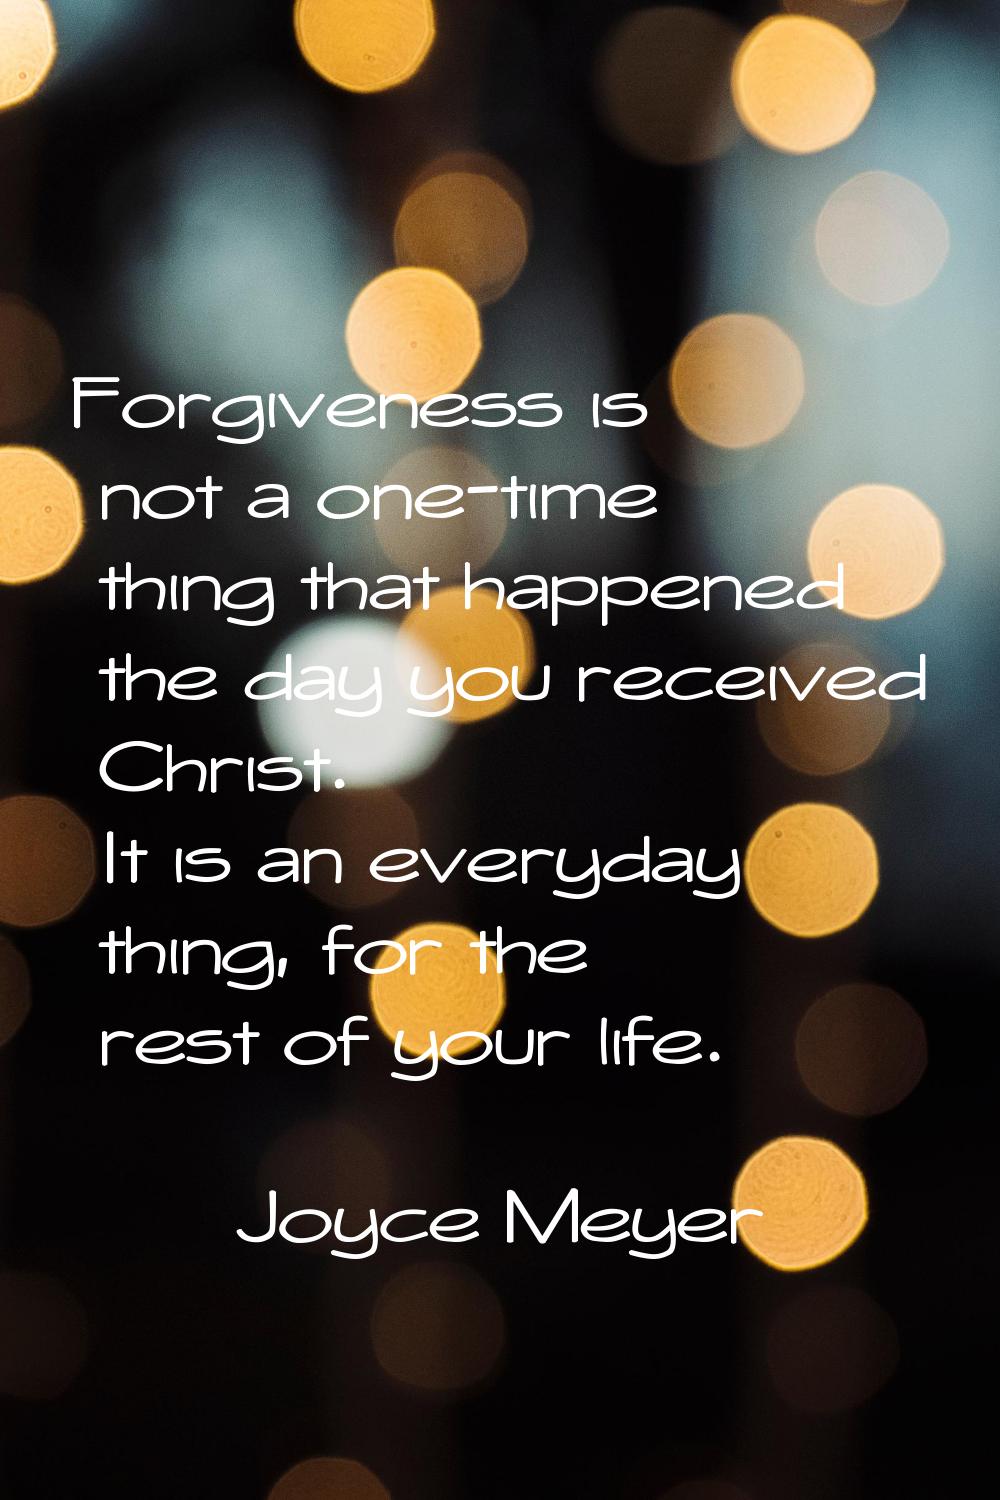 Forgiveness is not a one-time thing that happened the day you received Christ. It is an everyday th